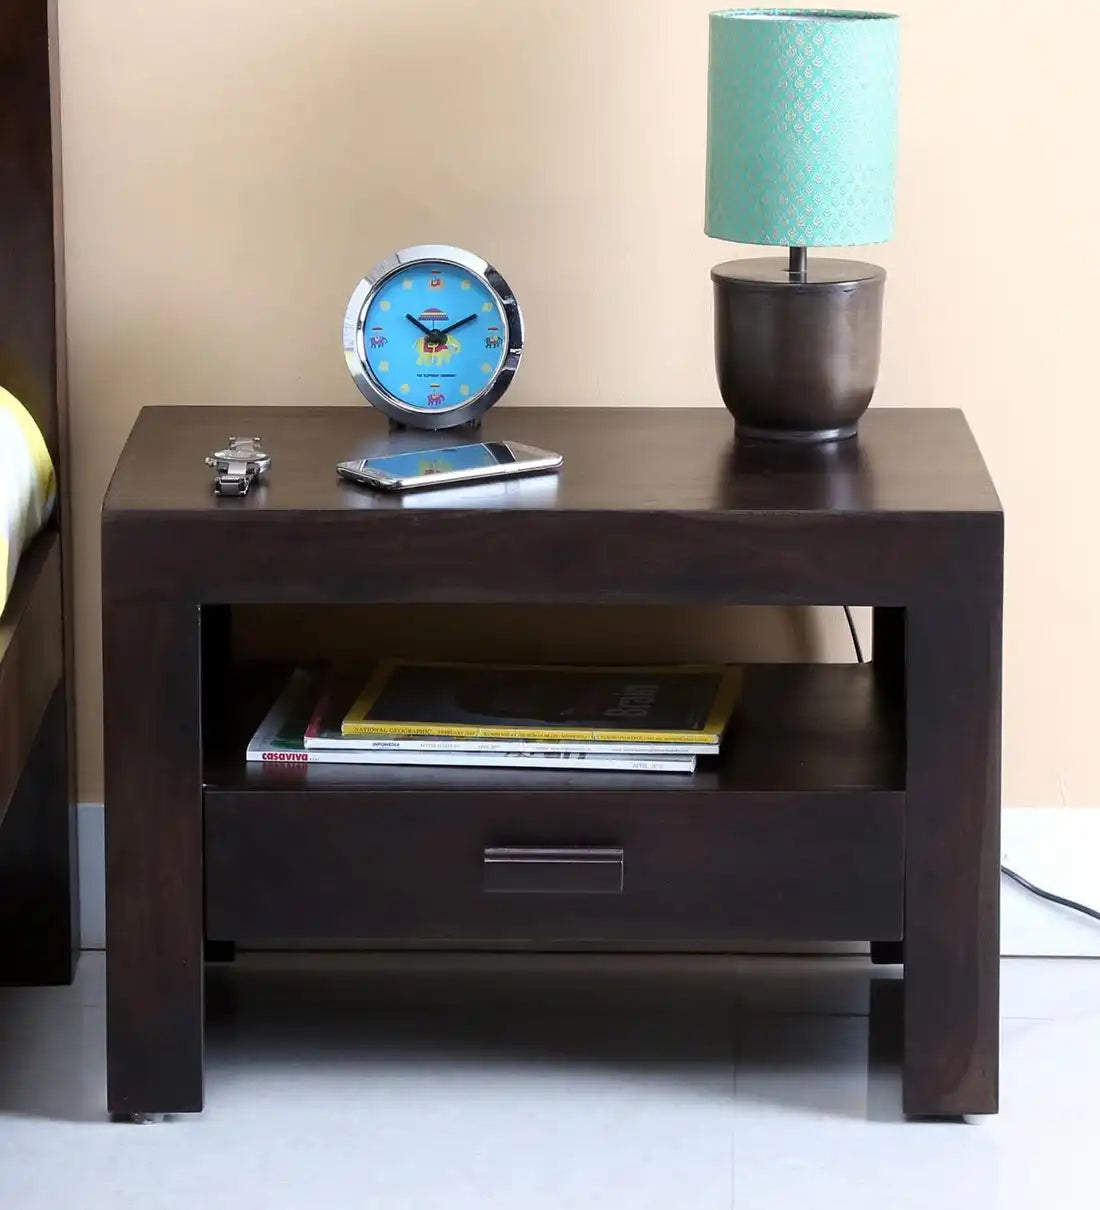 Acro Solid Wood Bedside Tables